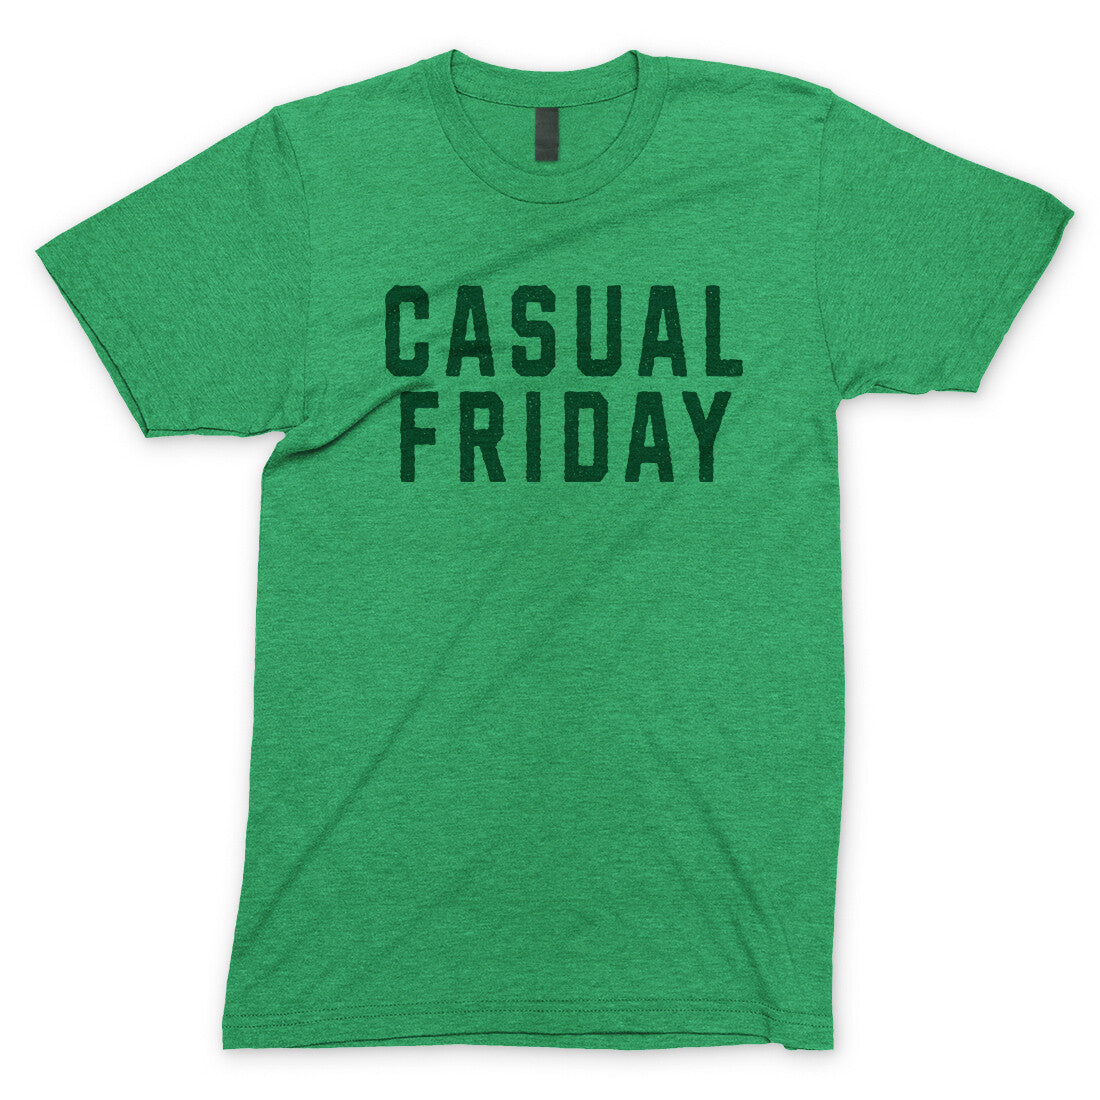 Casual Friday in Heather Irish Green Color